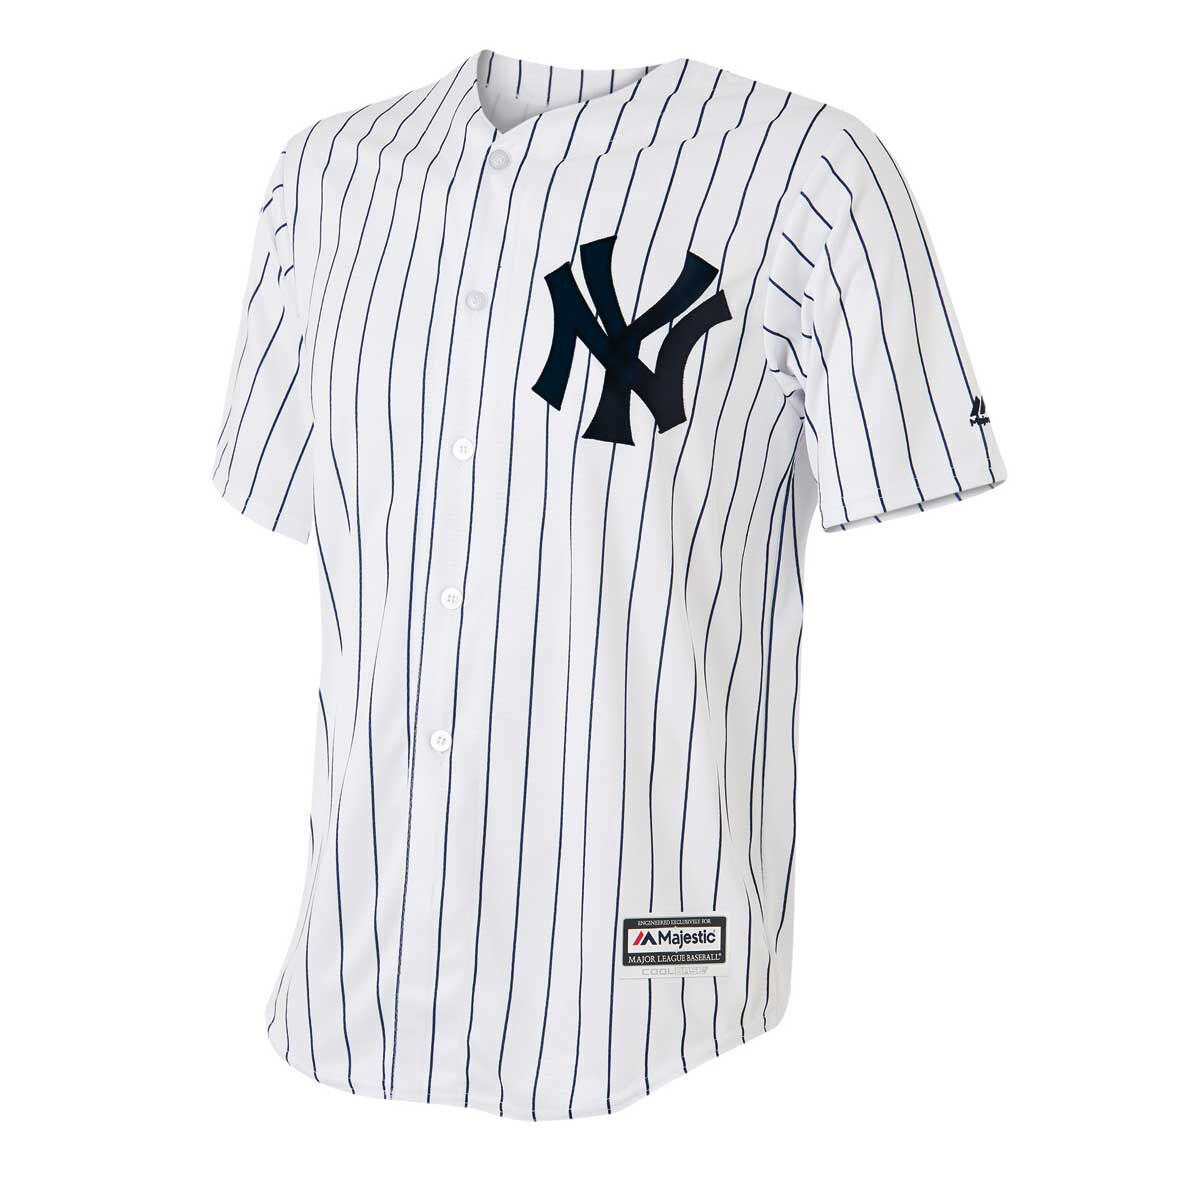 new jersey yankees